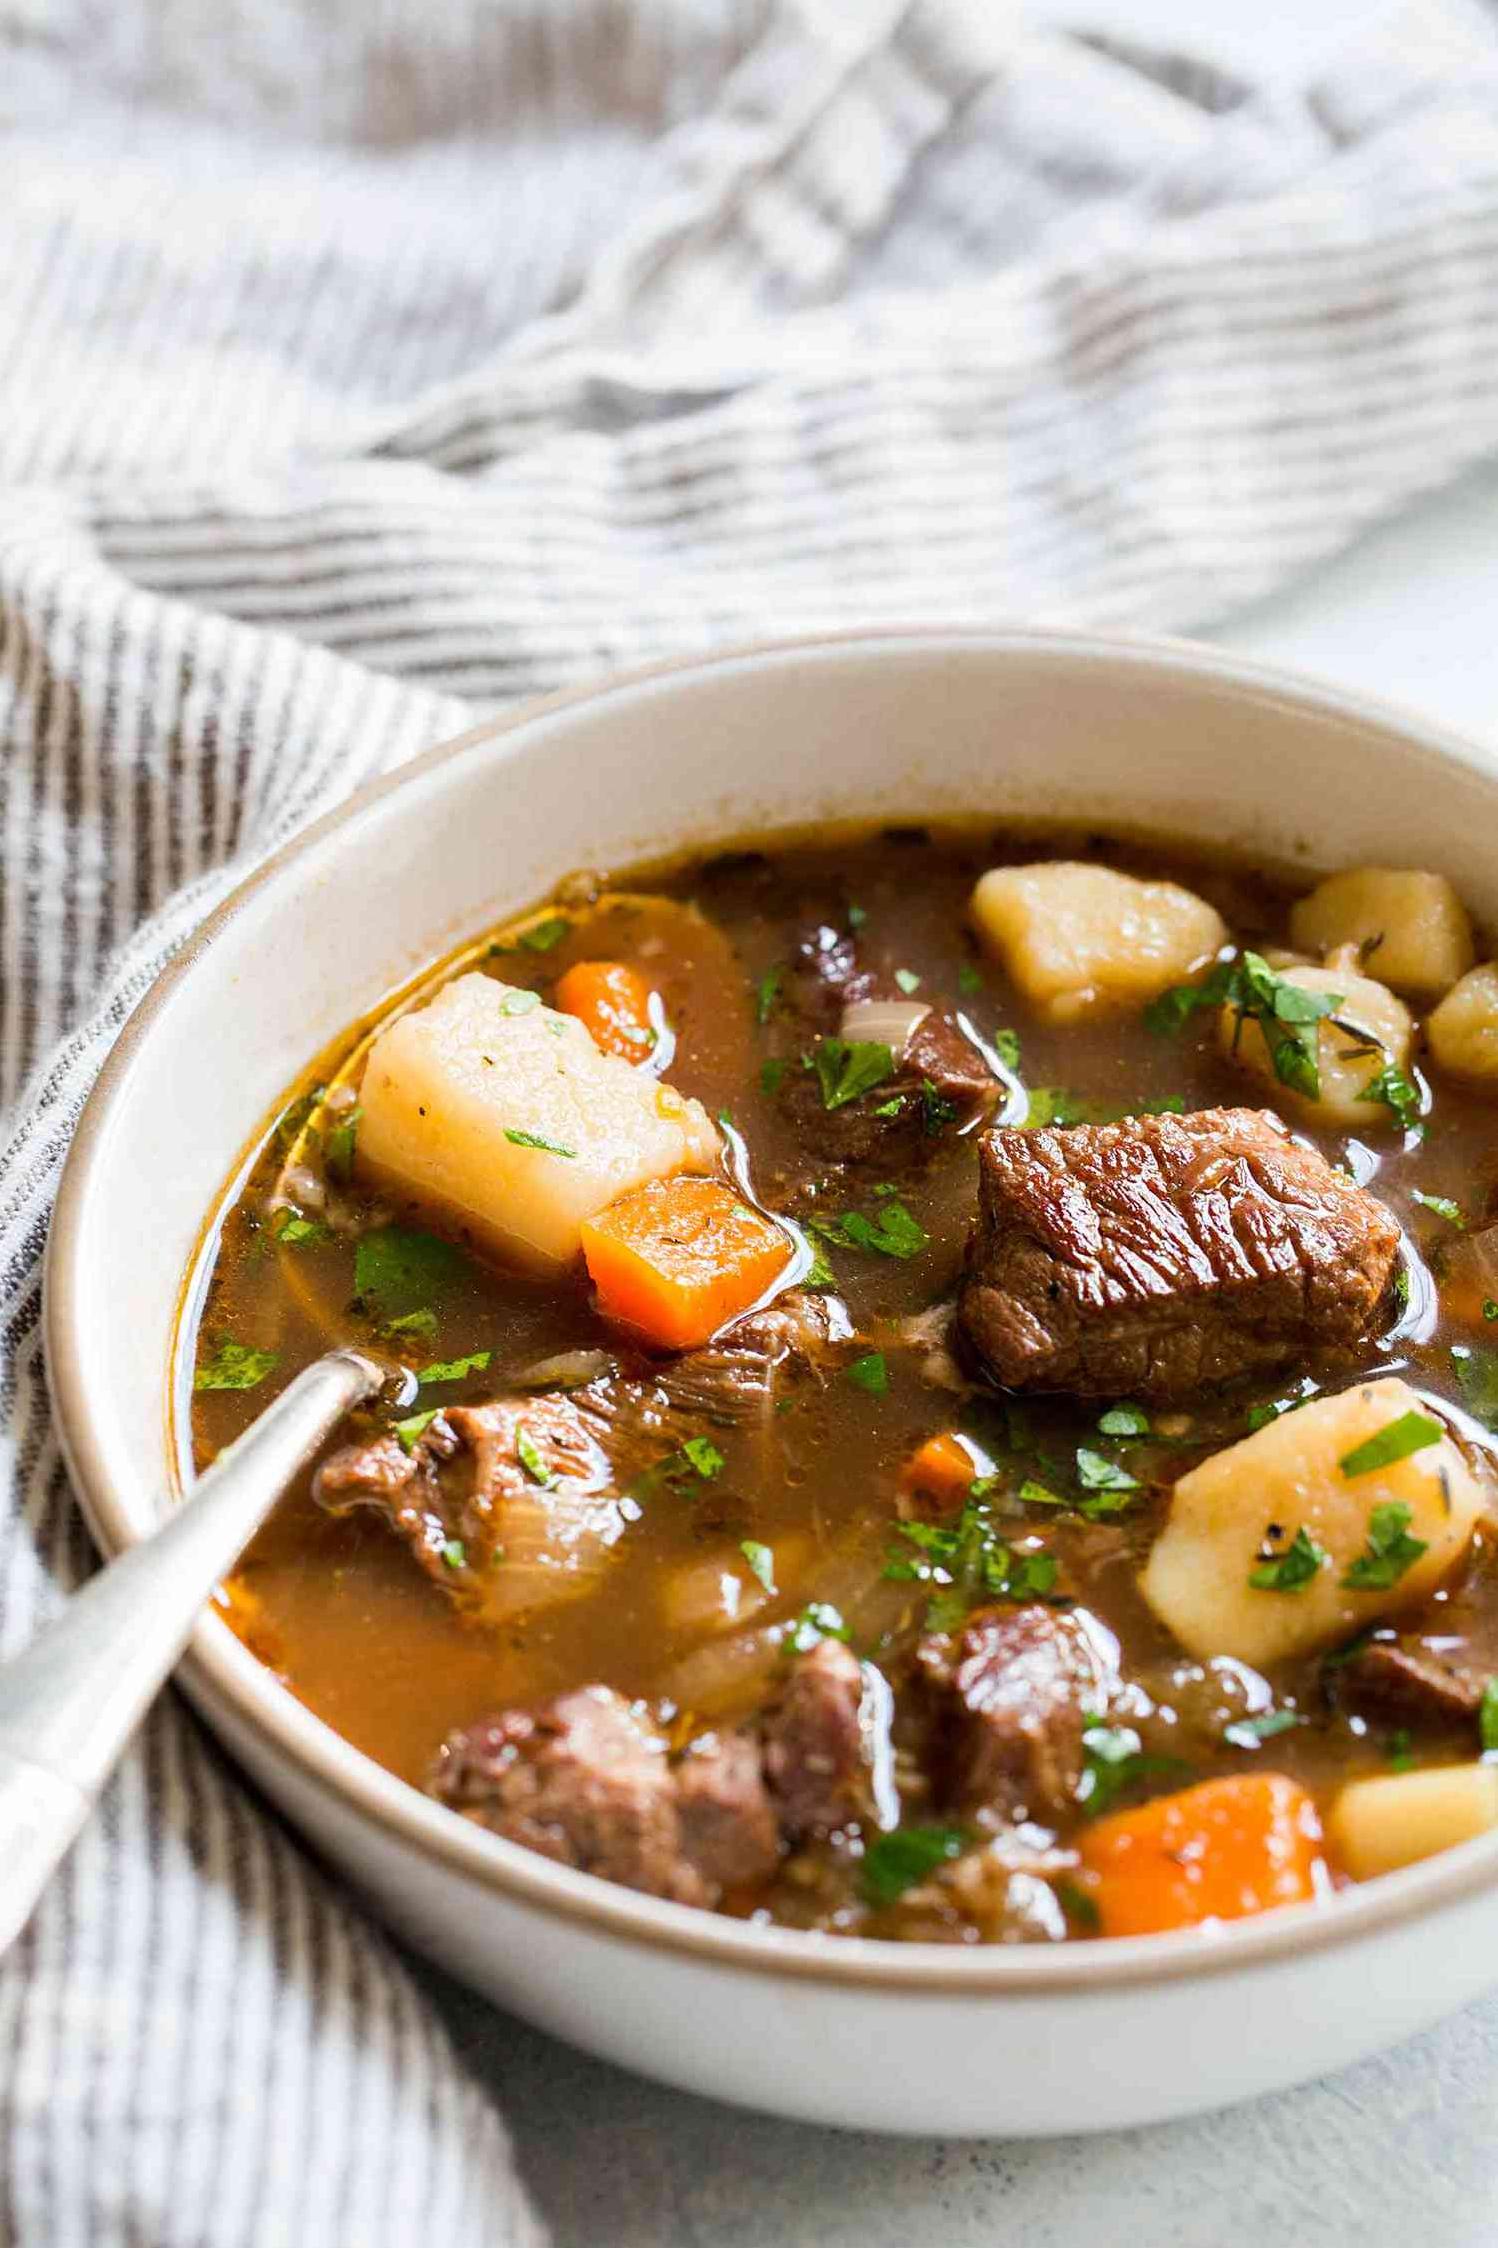  Get ready to cozy up with a warm and hearty bowl of Irish stew!